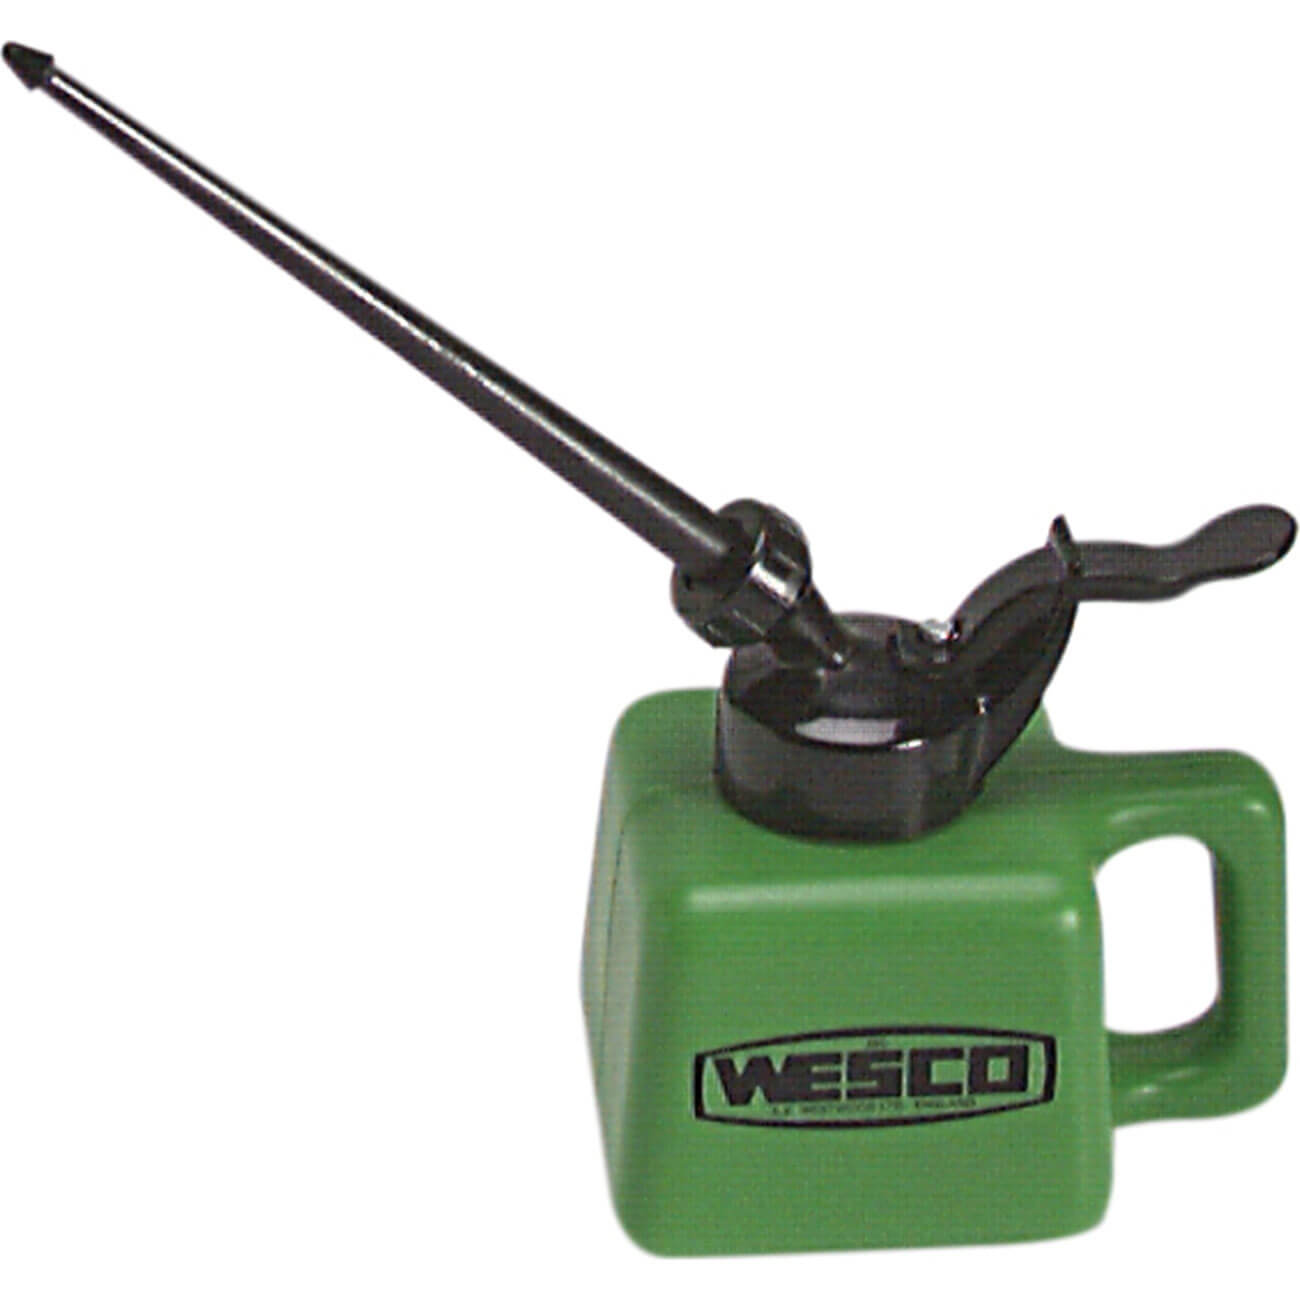 Photos - Car Service Station Equipment Wesco Polythene Oil Can and Nylon Spout 350ml 1000N 